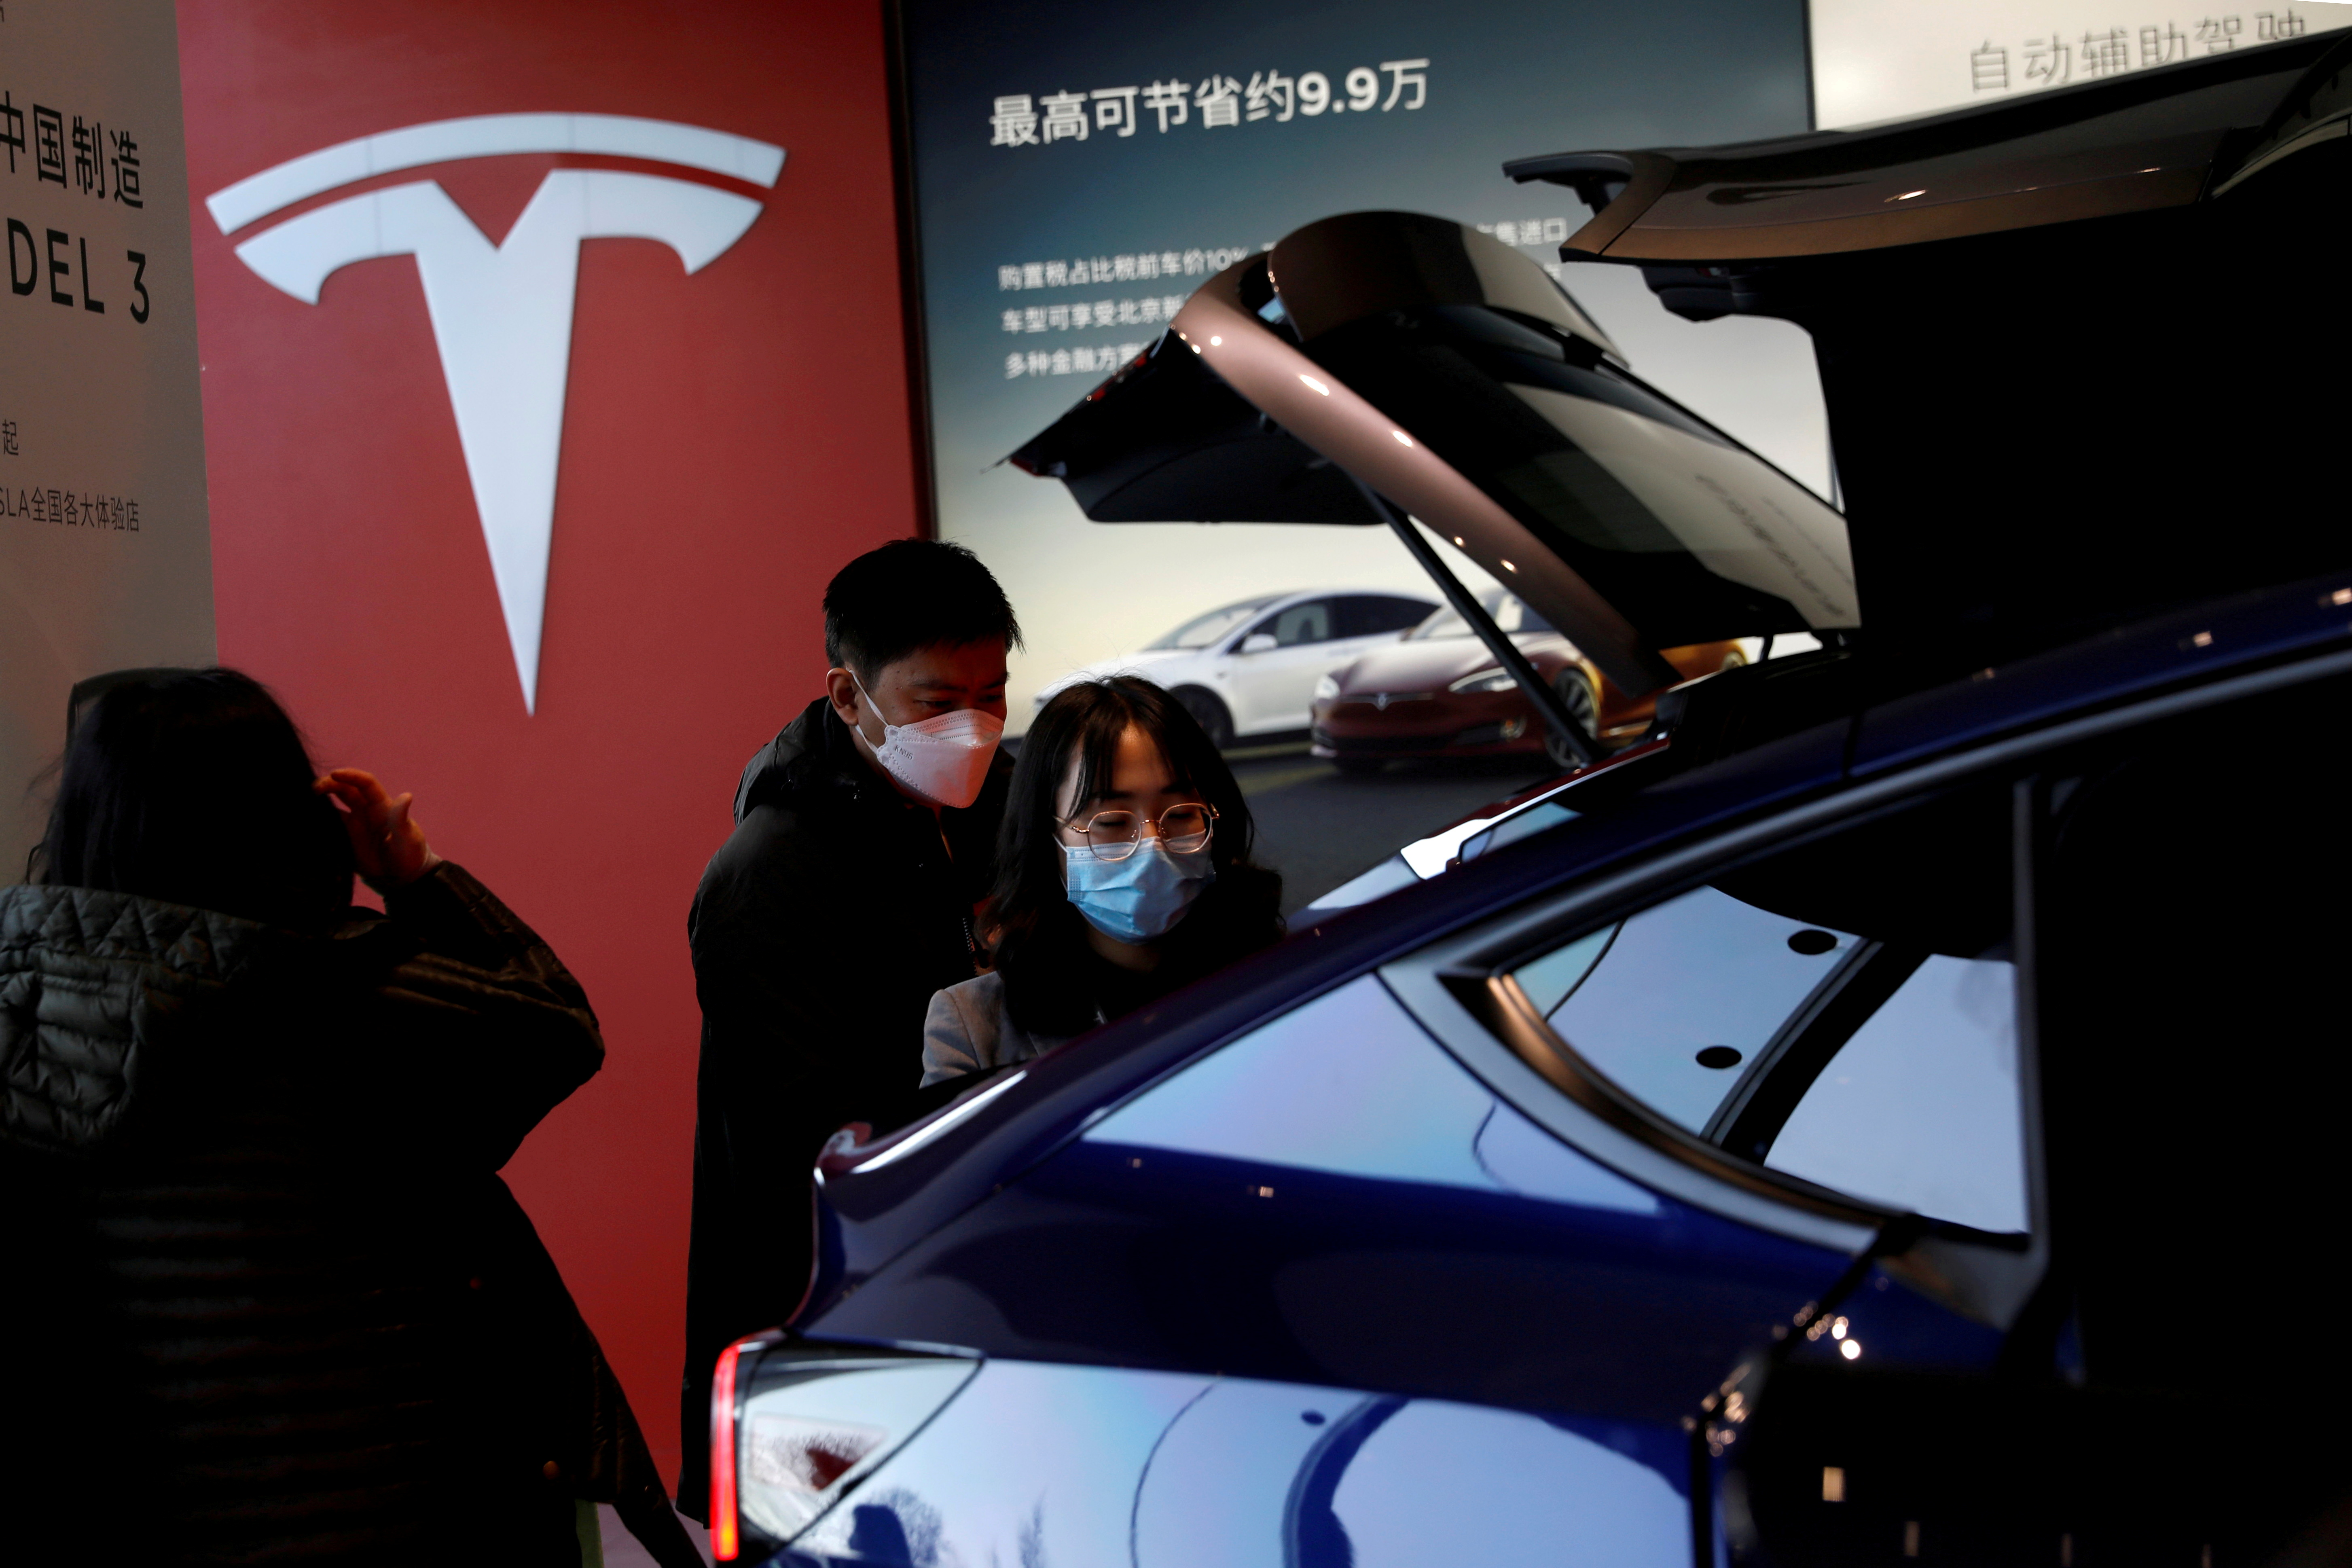 Visitors wearing face masks check a China-made Tesla Model Y sport utility vehicle (SUV) at the electric vehicle maker's showroom in Beijing